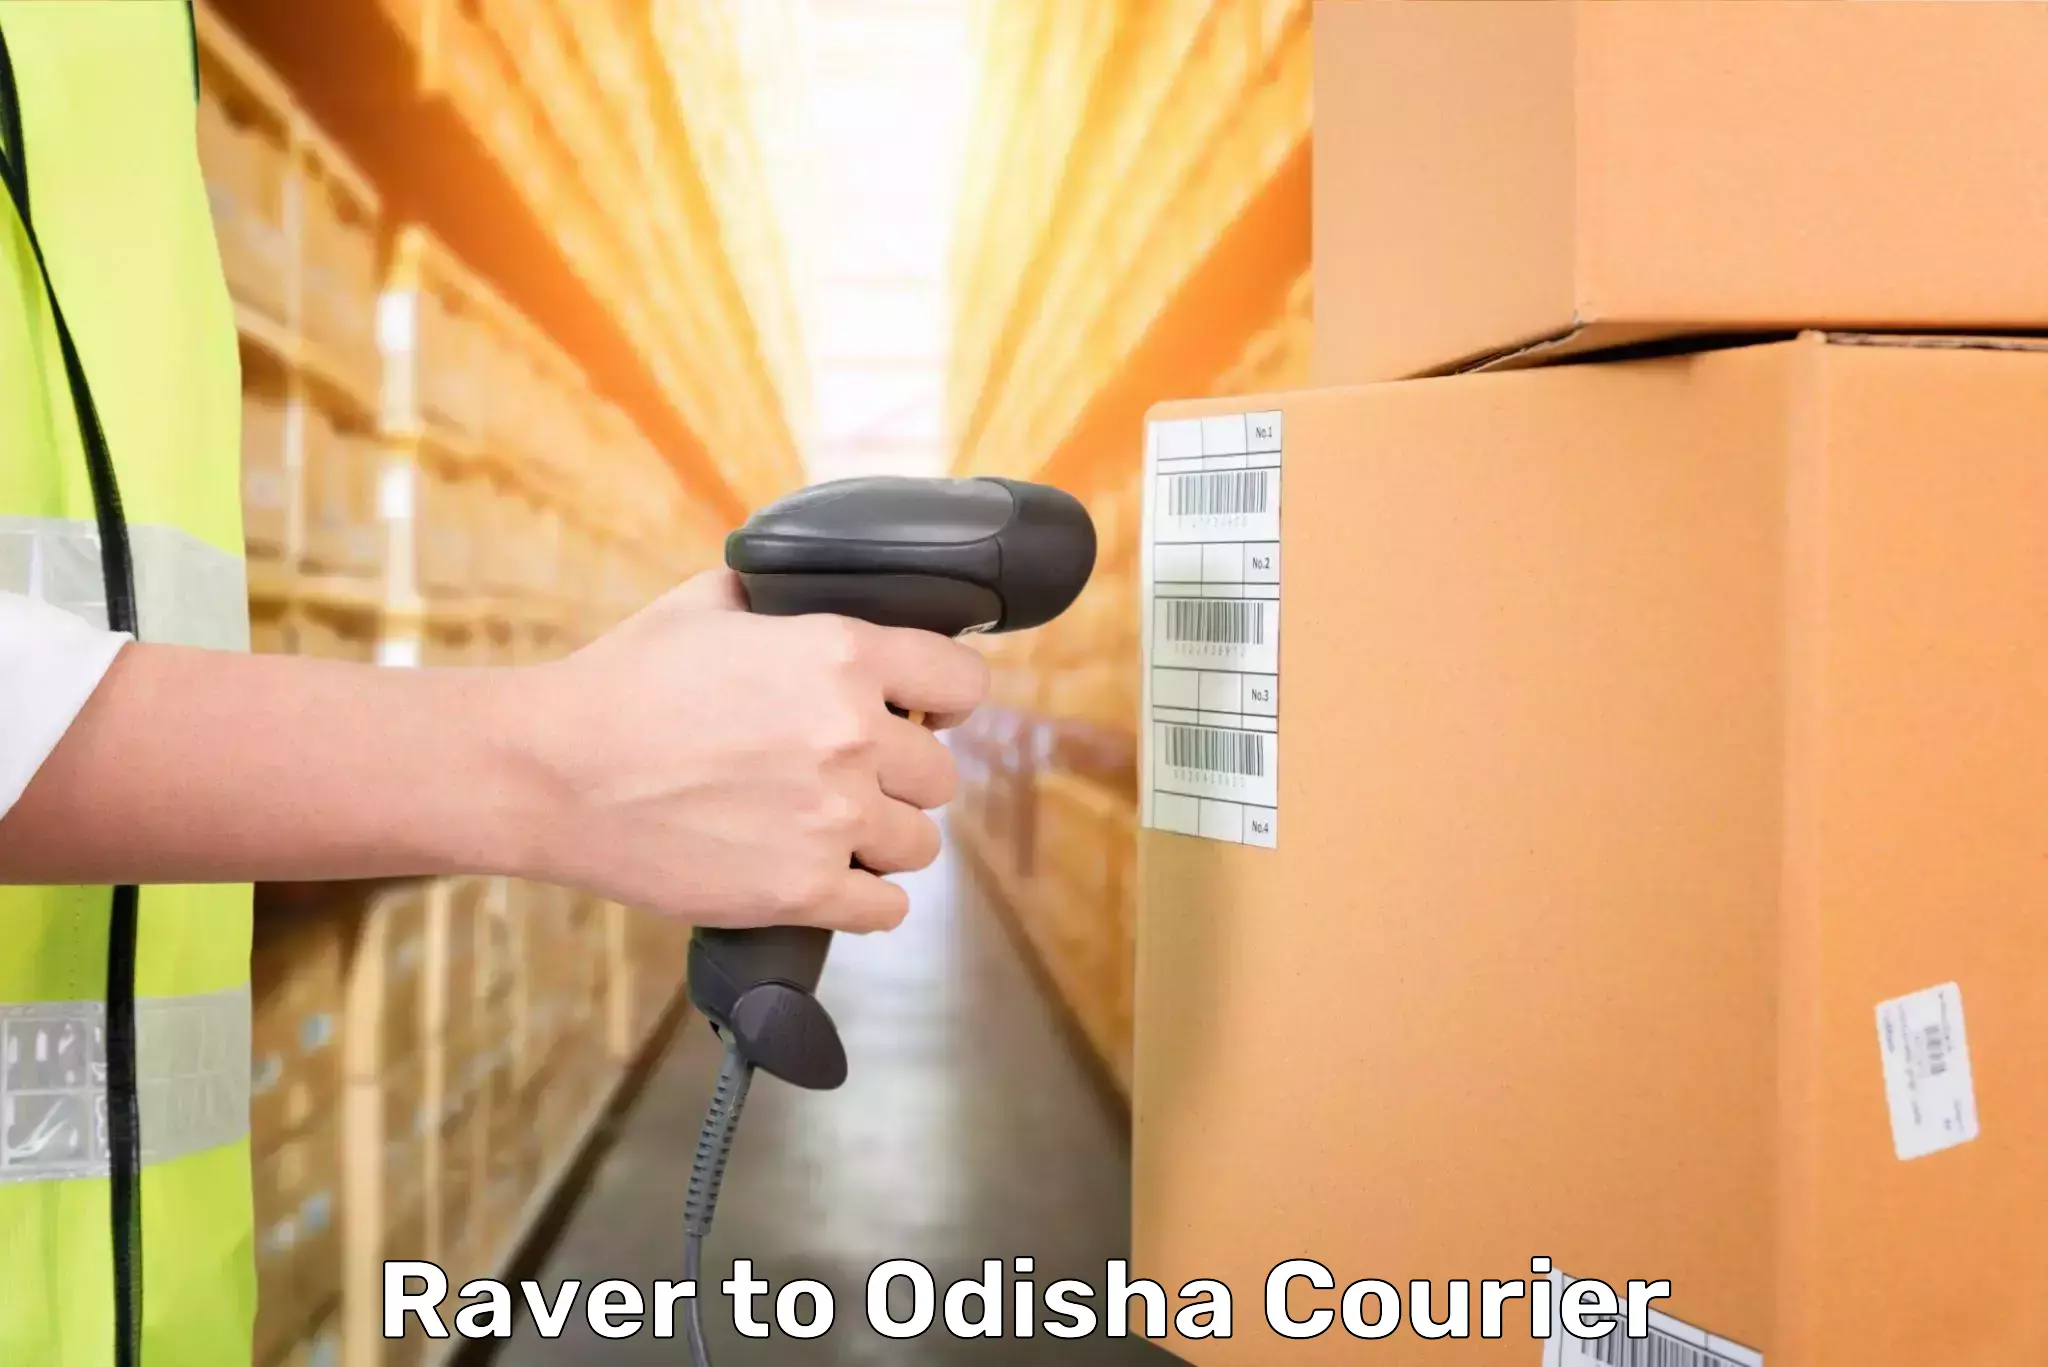 Luggage delivery solutions Raver to Ukhunda